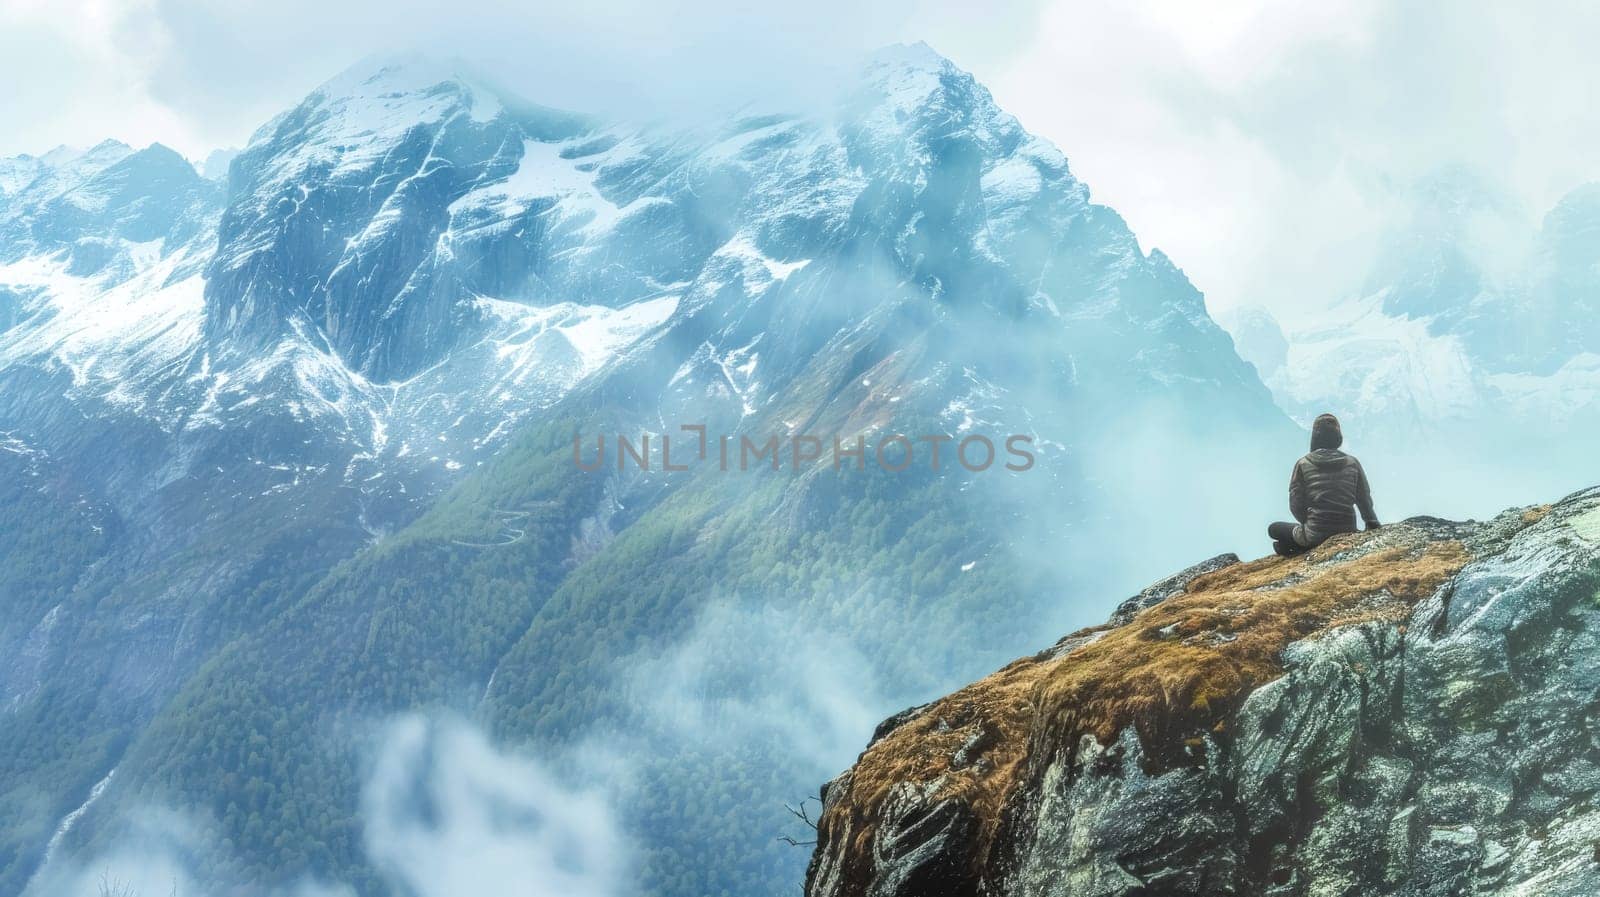 Lone individual sits on a cliff overlooking majestic snowy mountains shrouded in mist